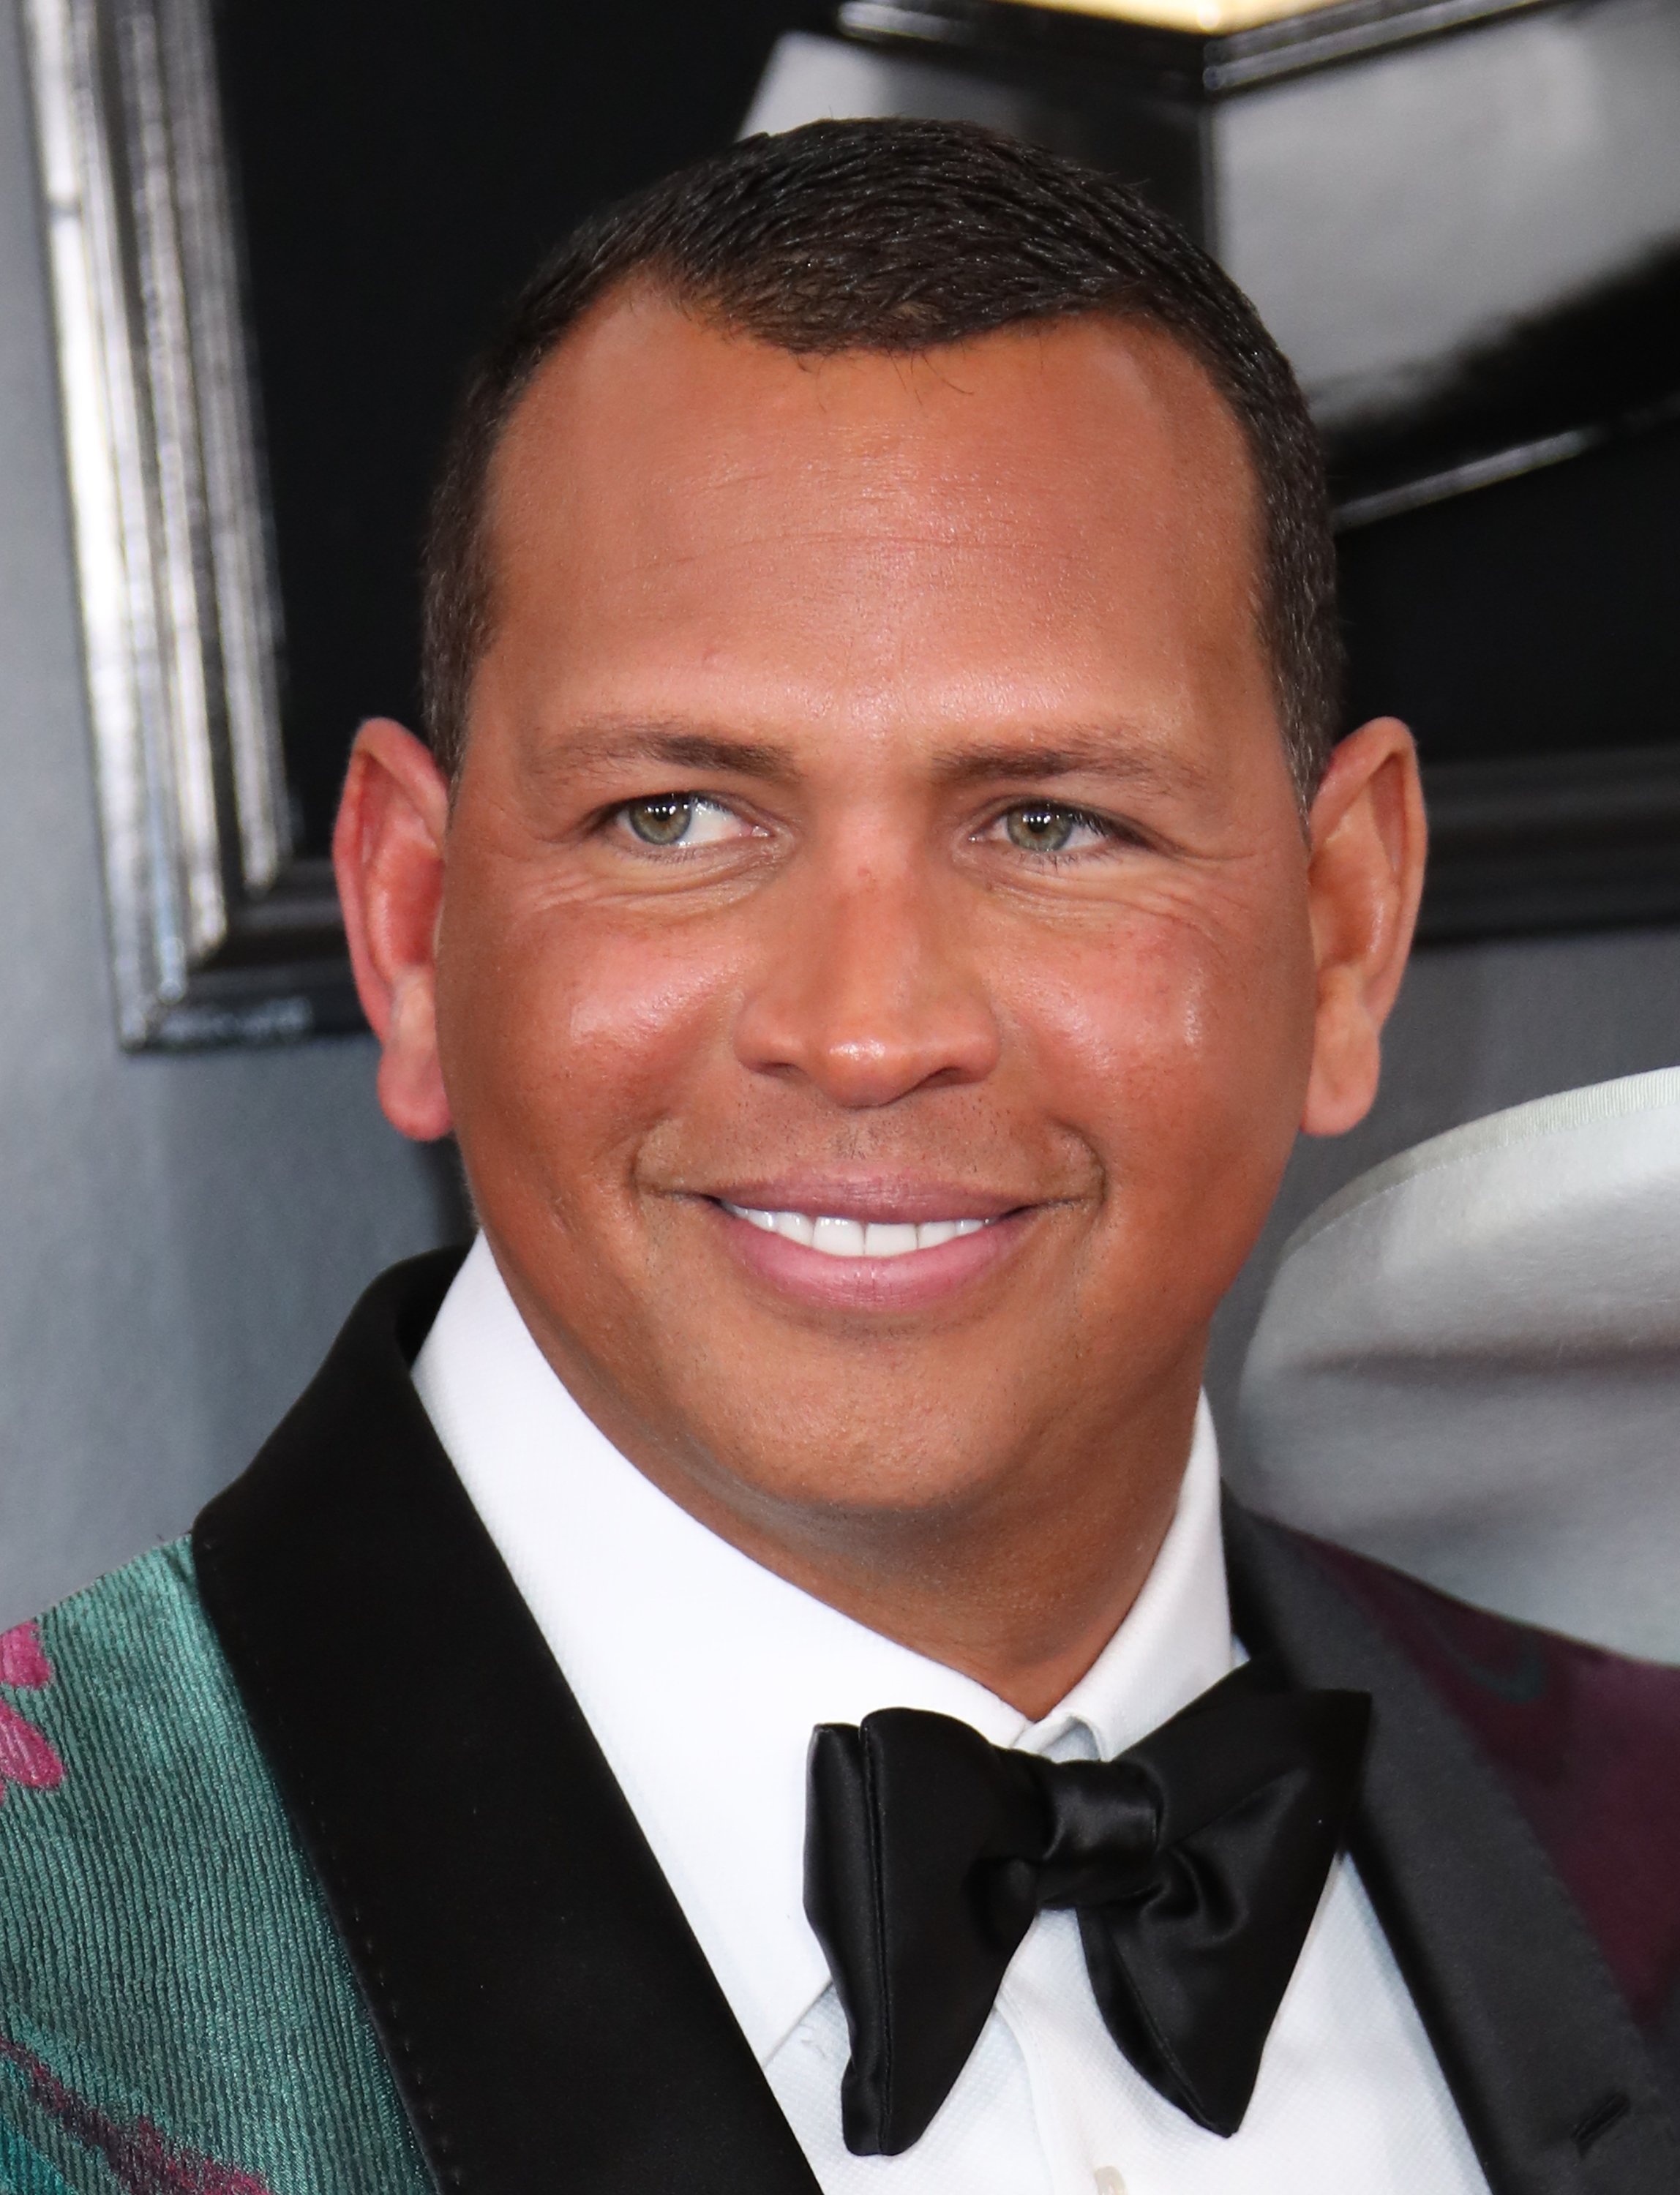 Alex Rodriguez attends the 61st Annual GRAMMY Awards at Staples Center on February 10, 2019, in Los Angeles, California. | Source: Getty Images.